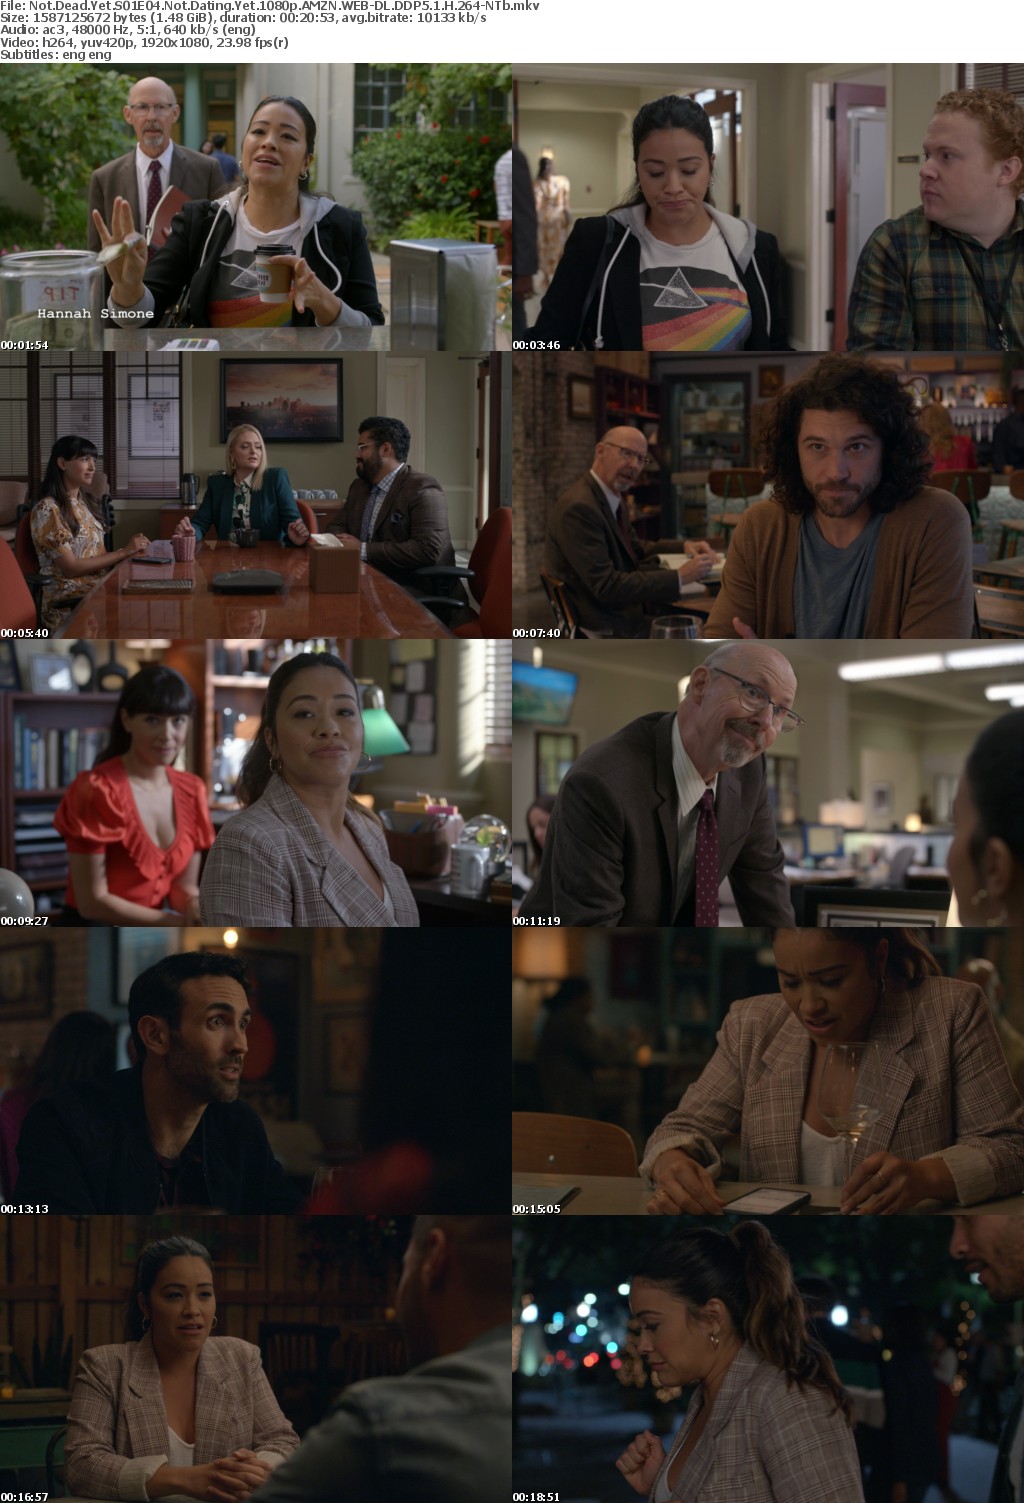 Not Dead Yet S01E04 Not Dating Yet 1080p AMZN WEBRip DDP5 1 x264-NTb